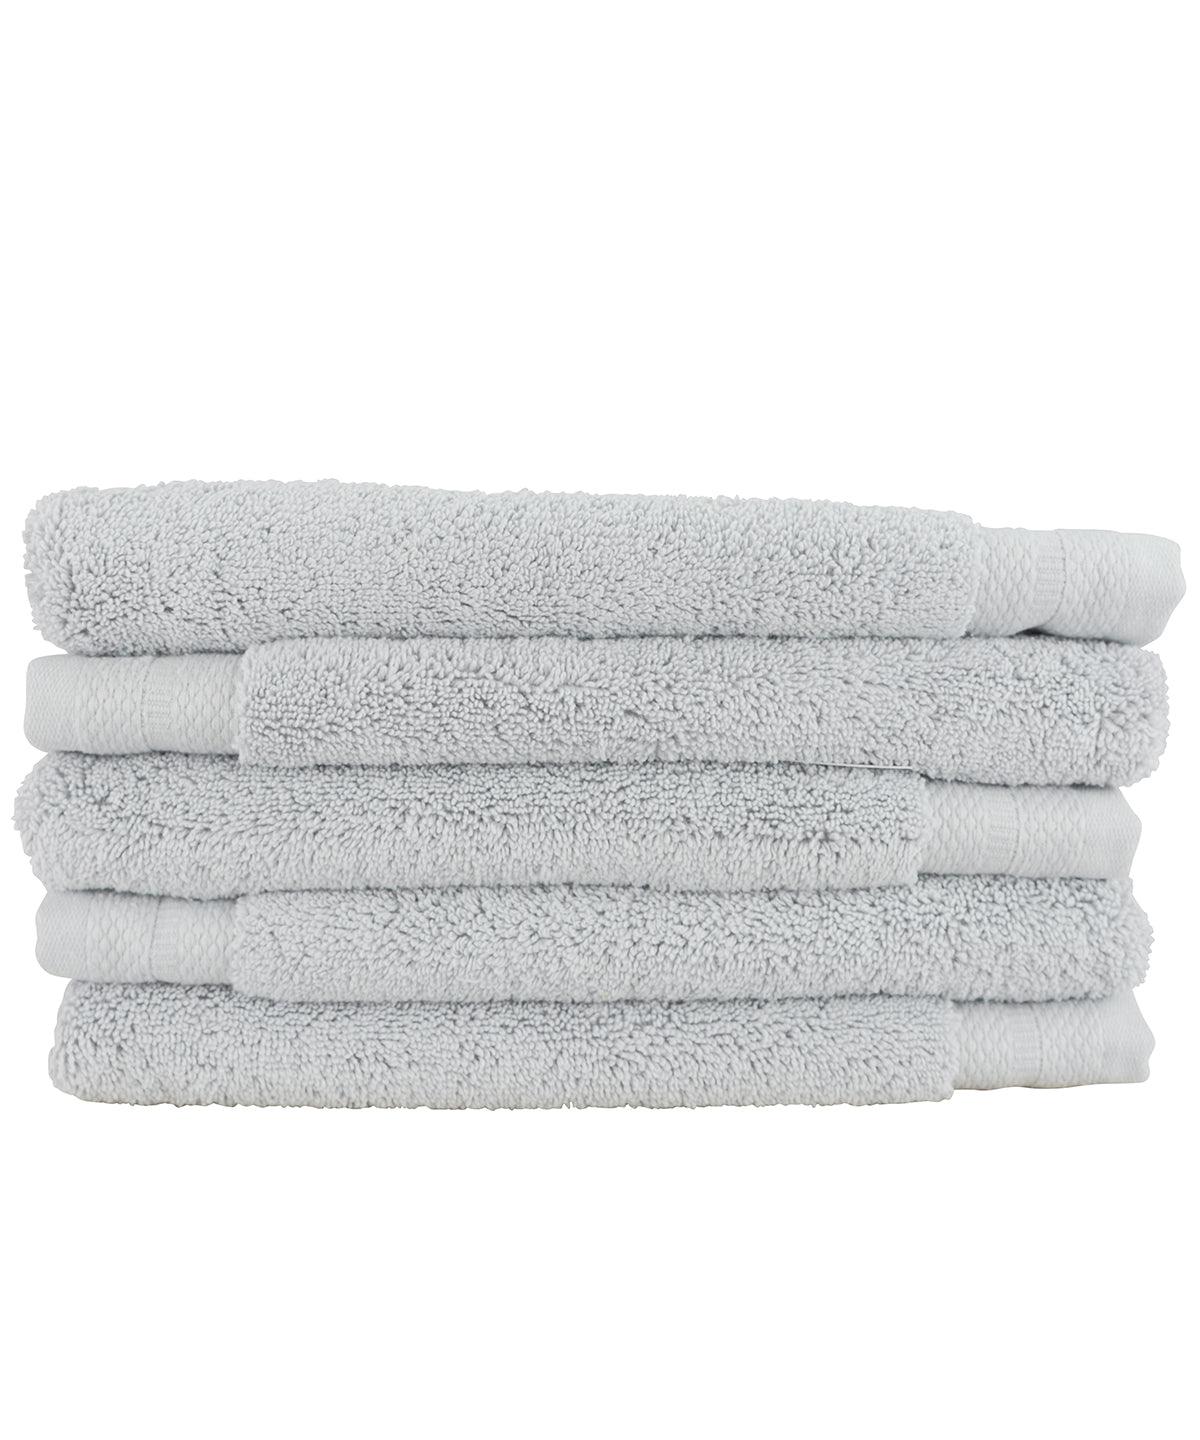 Light Grey - ARTG® Pure luxe guest towel Towels A&R Towels Gifting & Accessories, Homewares & Towelling Schoolwear Centres